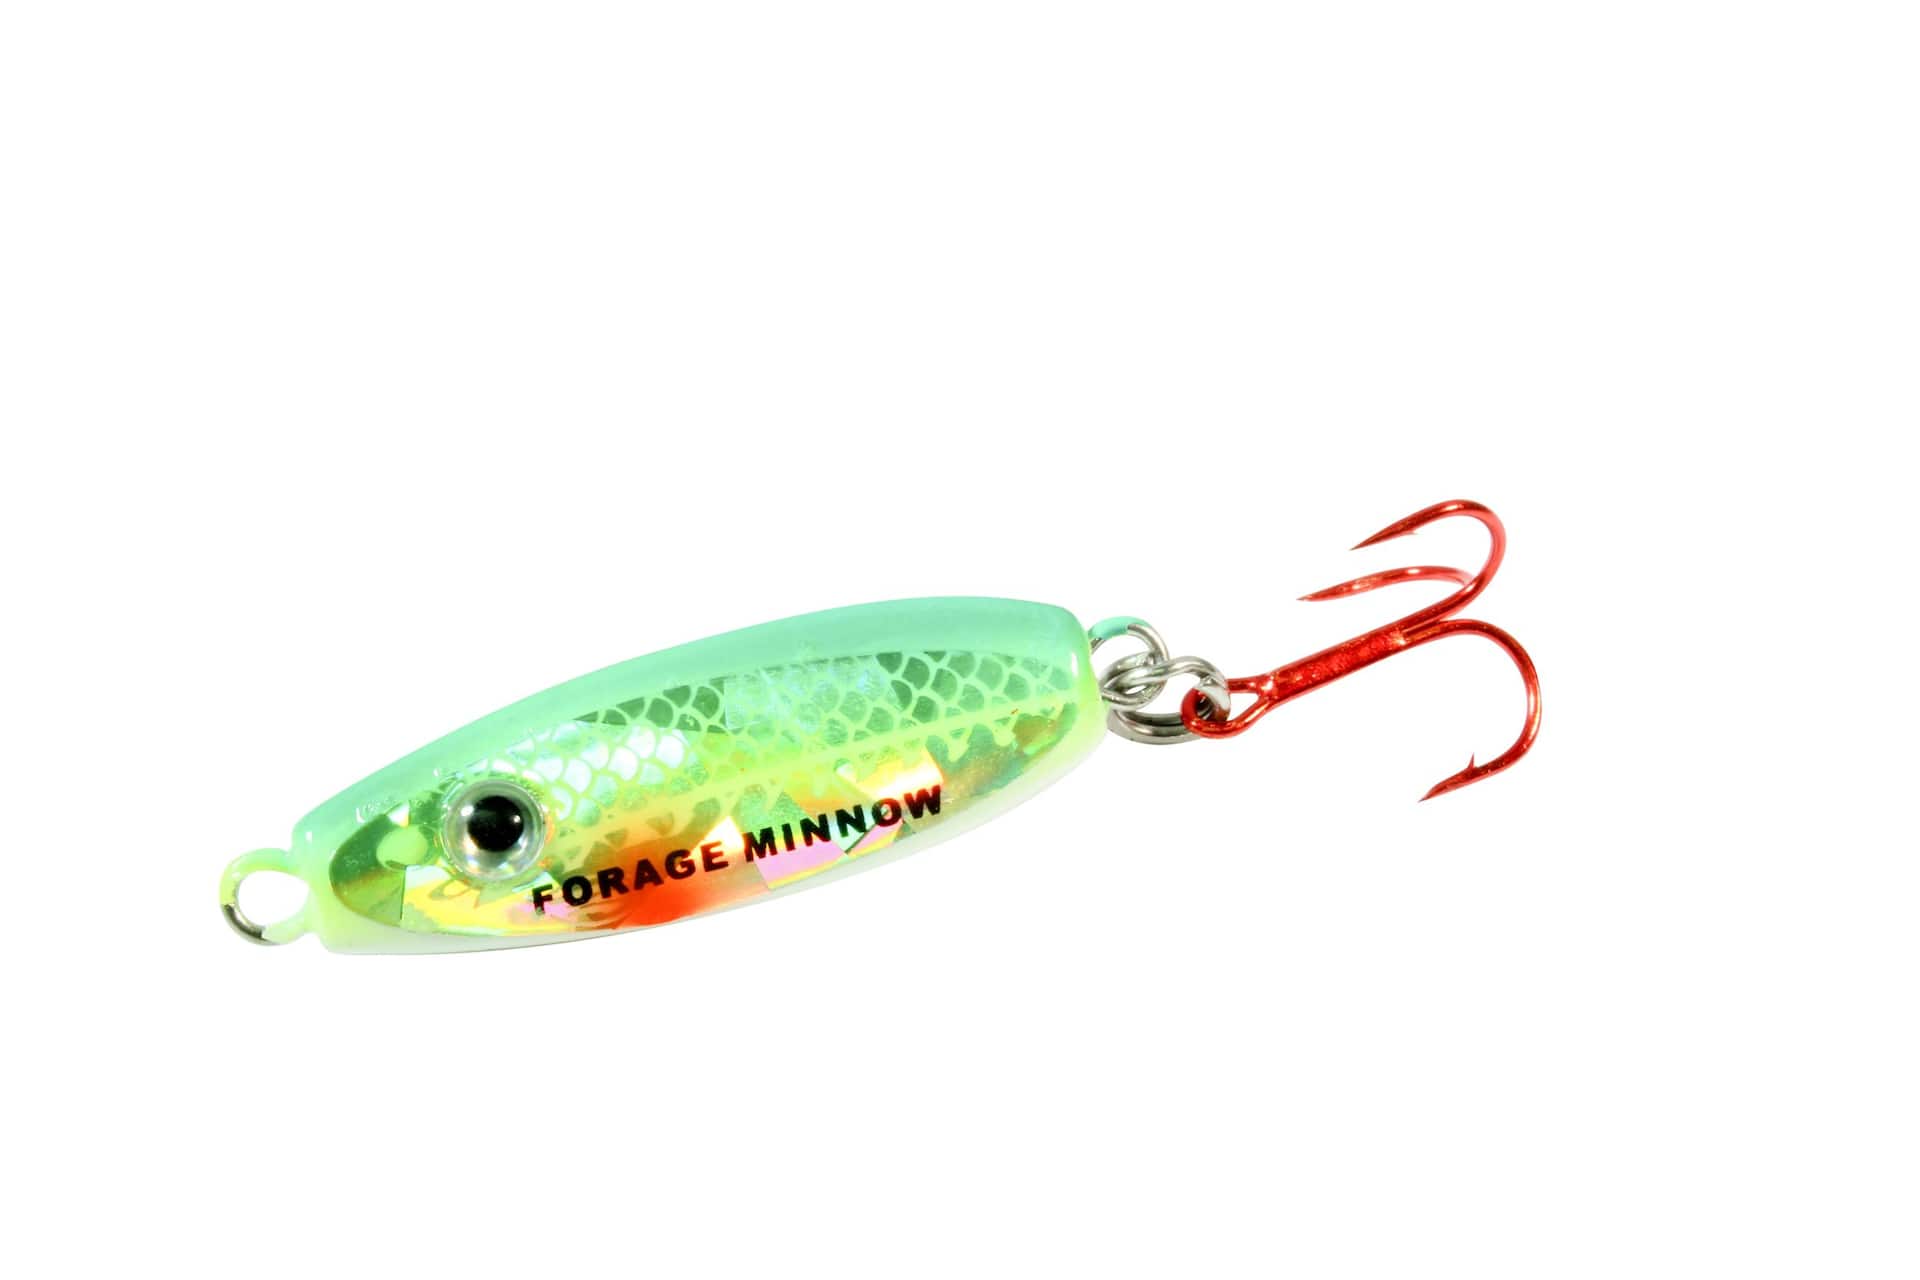 Ice Fishing Automatic Hook Setter 3 for $9.99 for use in ice